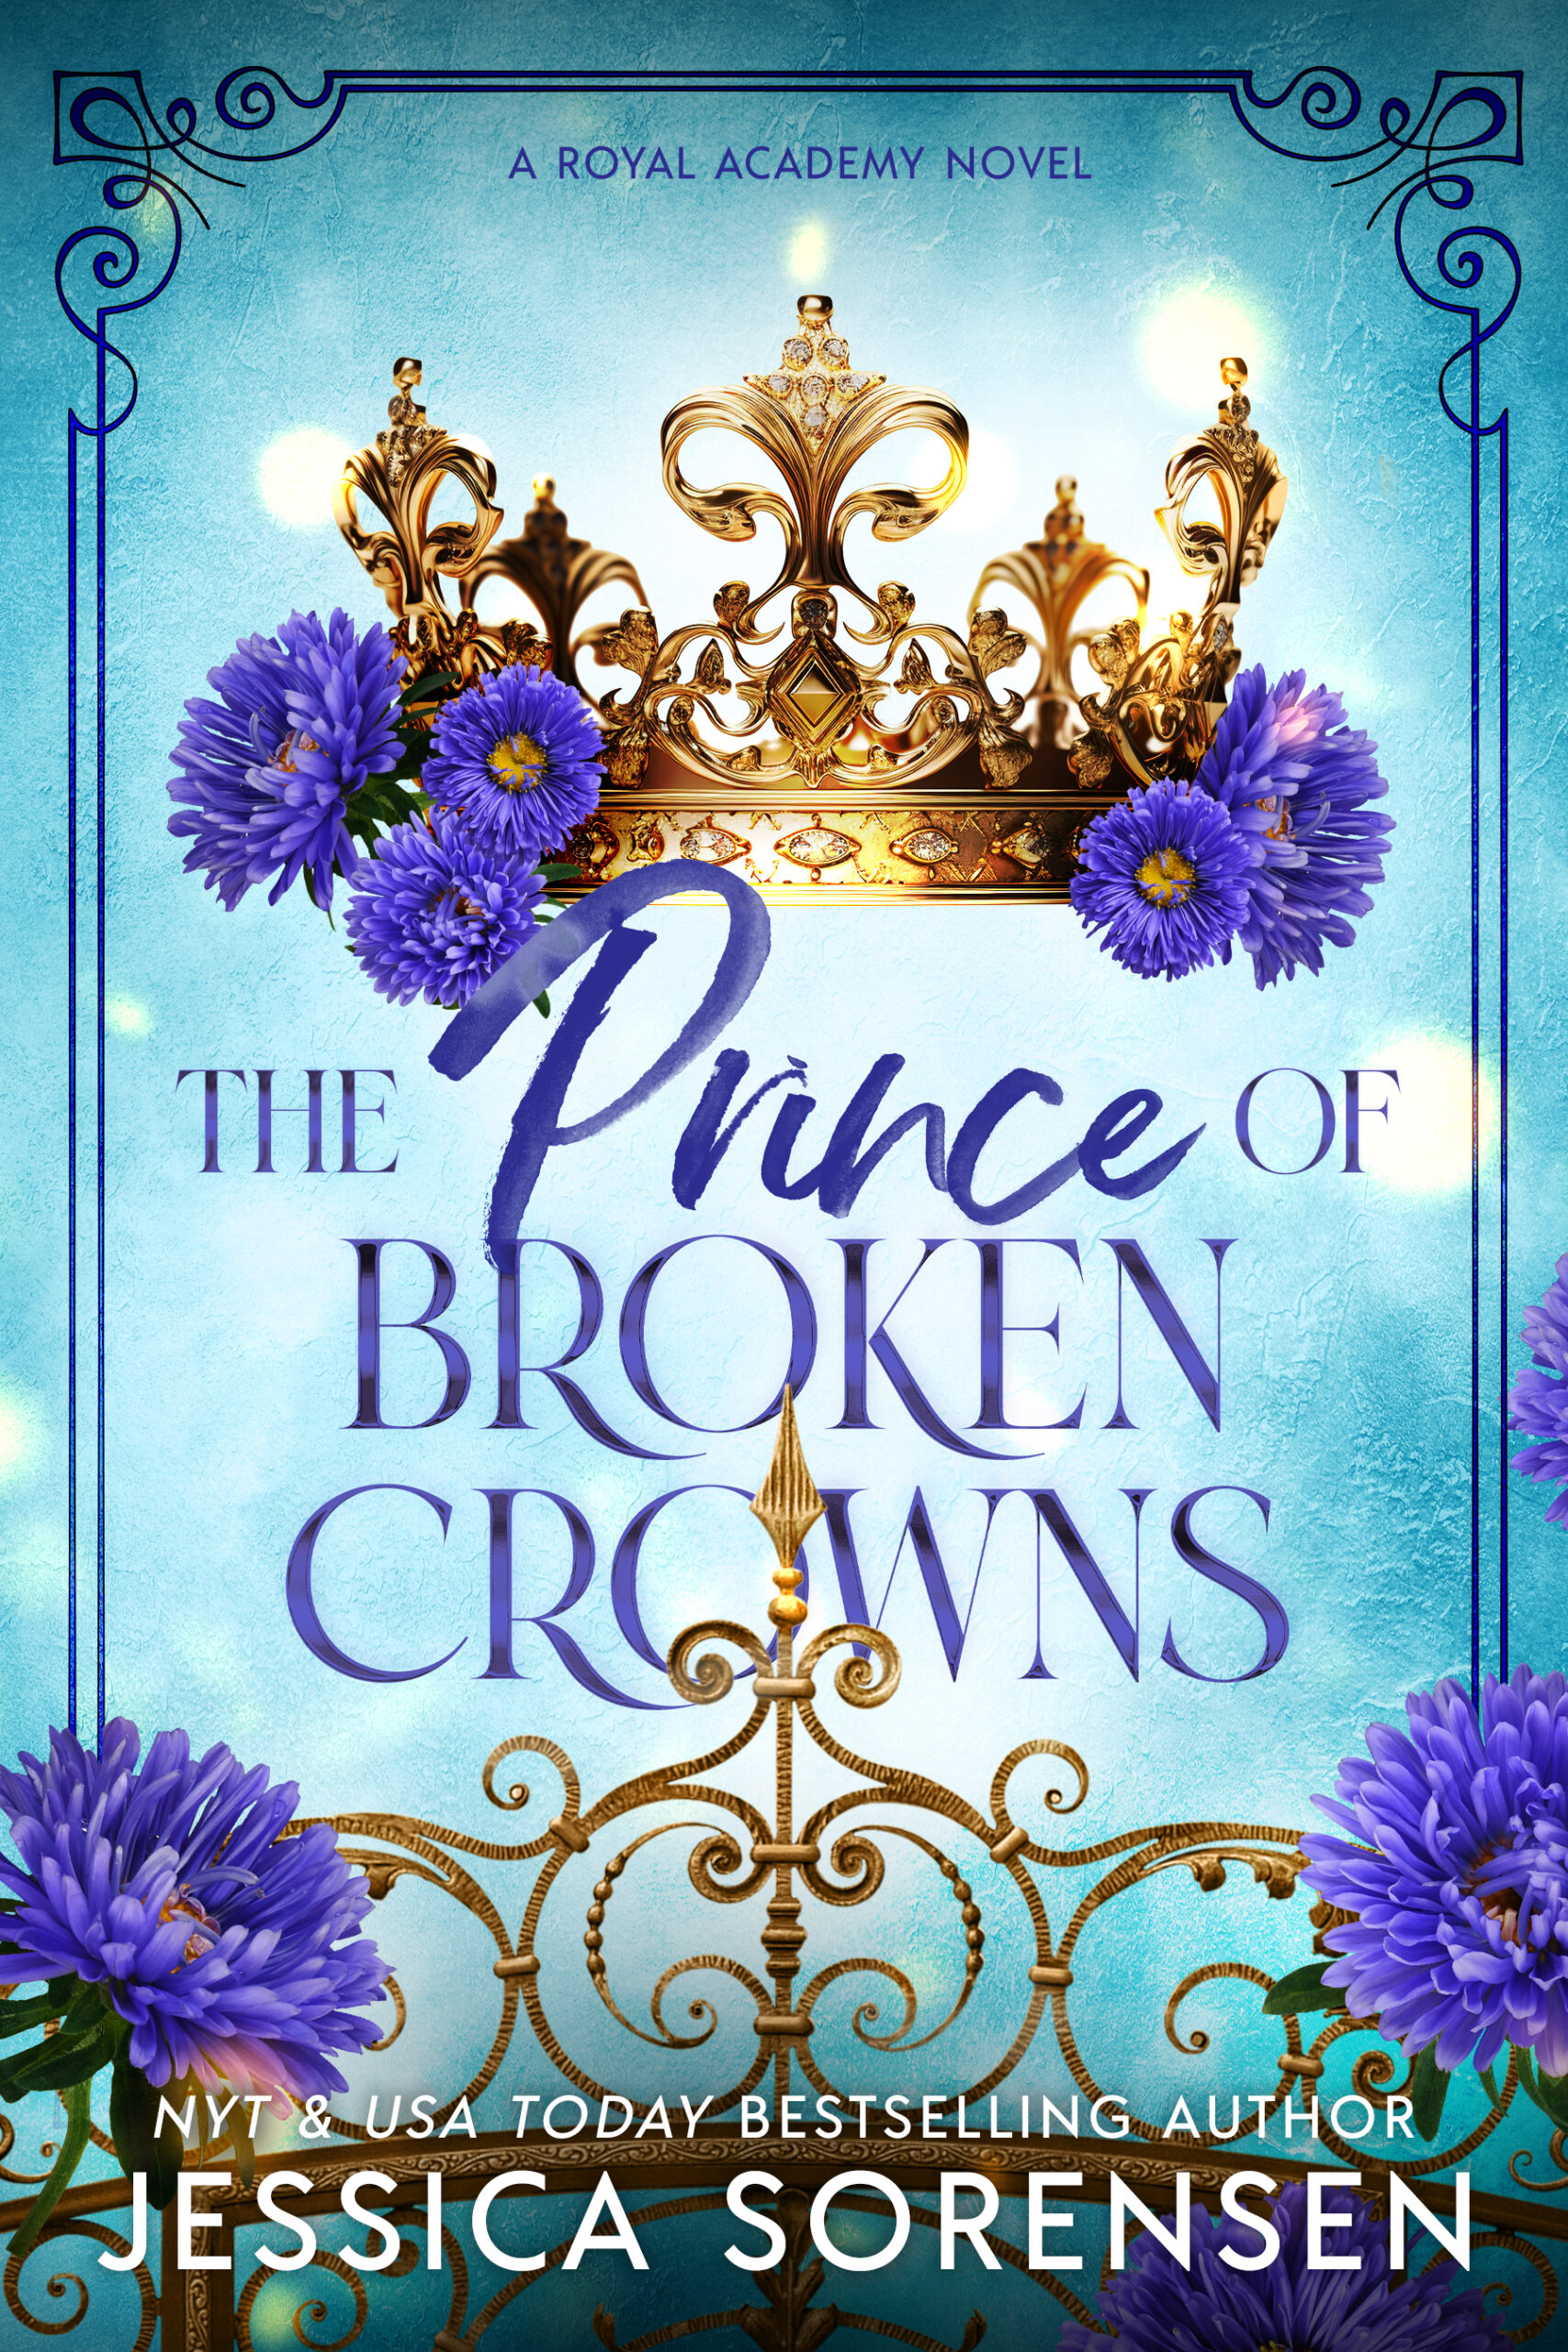 The Prince of Broken Crowns